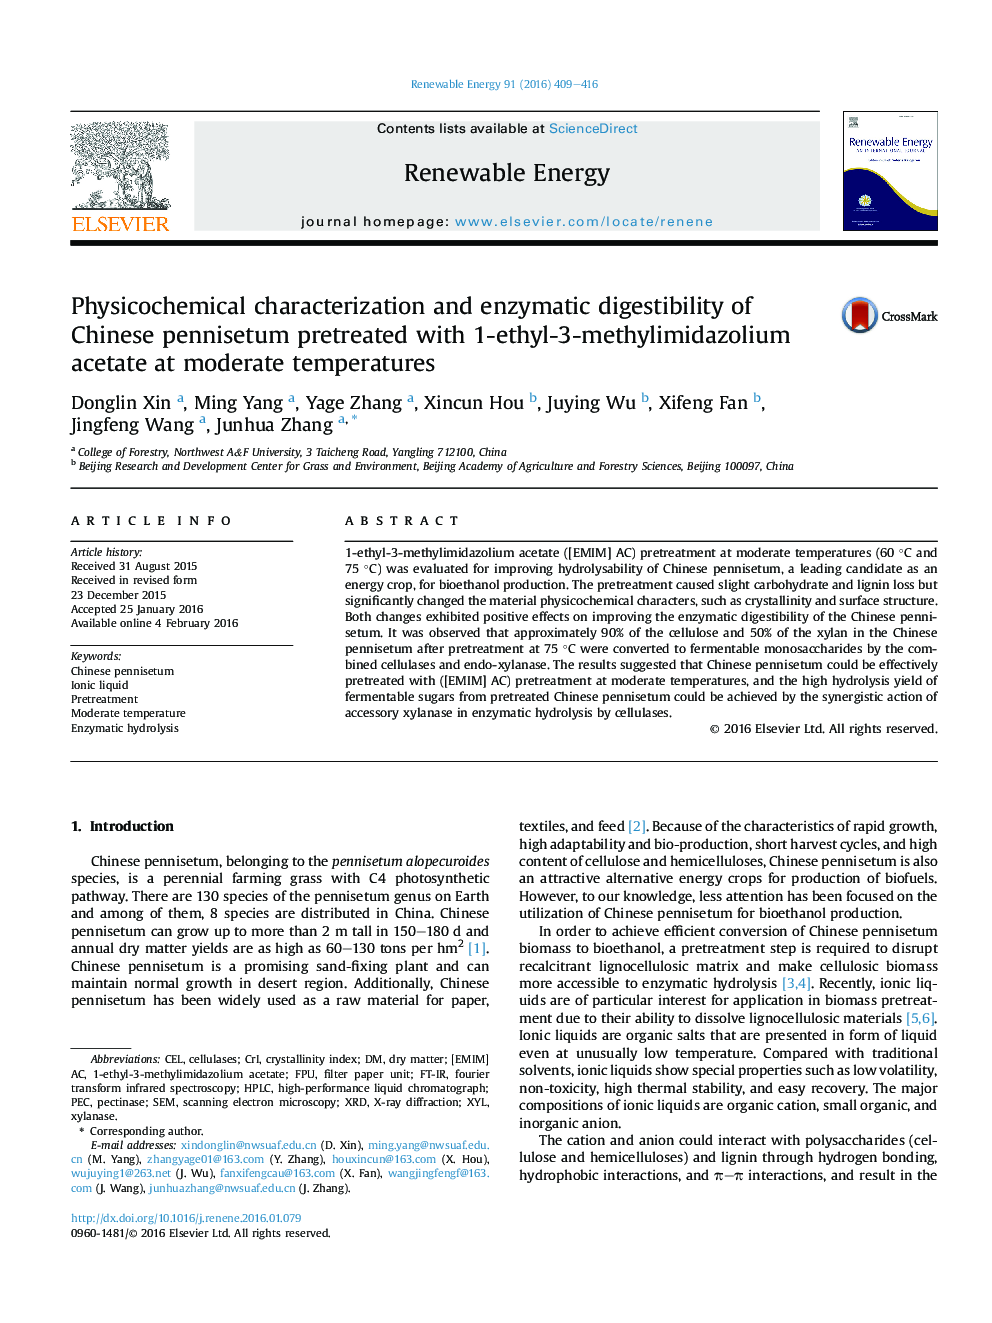 Physicochemical characterization and enzymatic digestibility of Chinese pennisetum pretreated with 1-ethyl-3-methylimidazolium acetate at moderate temperatures